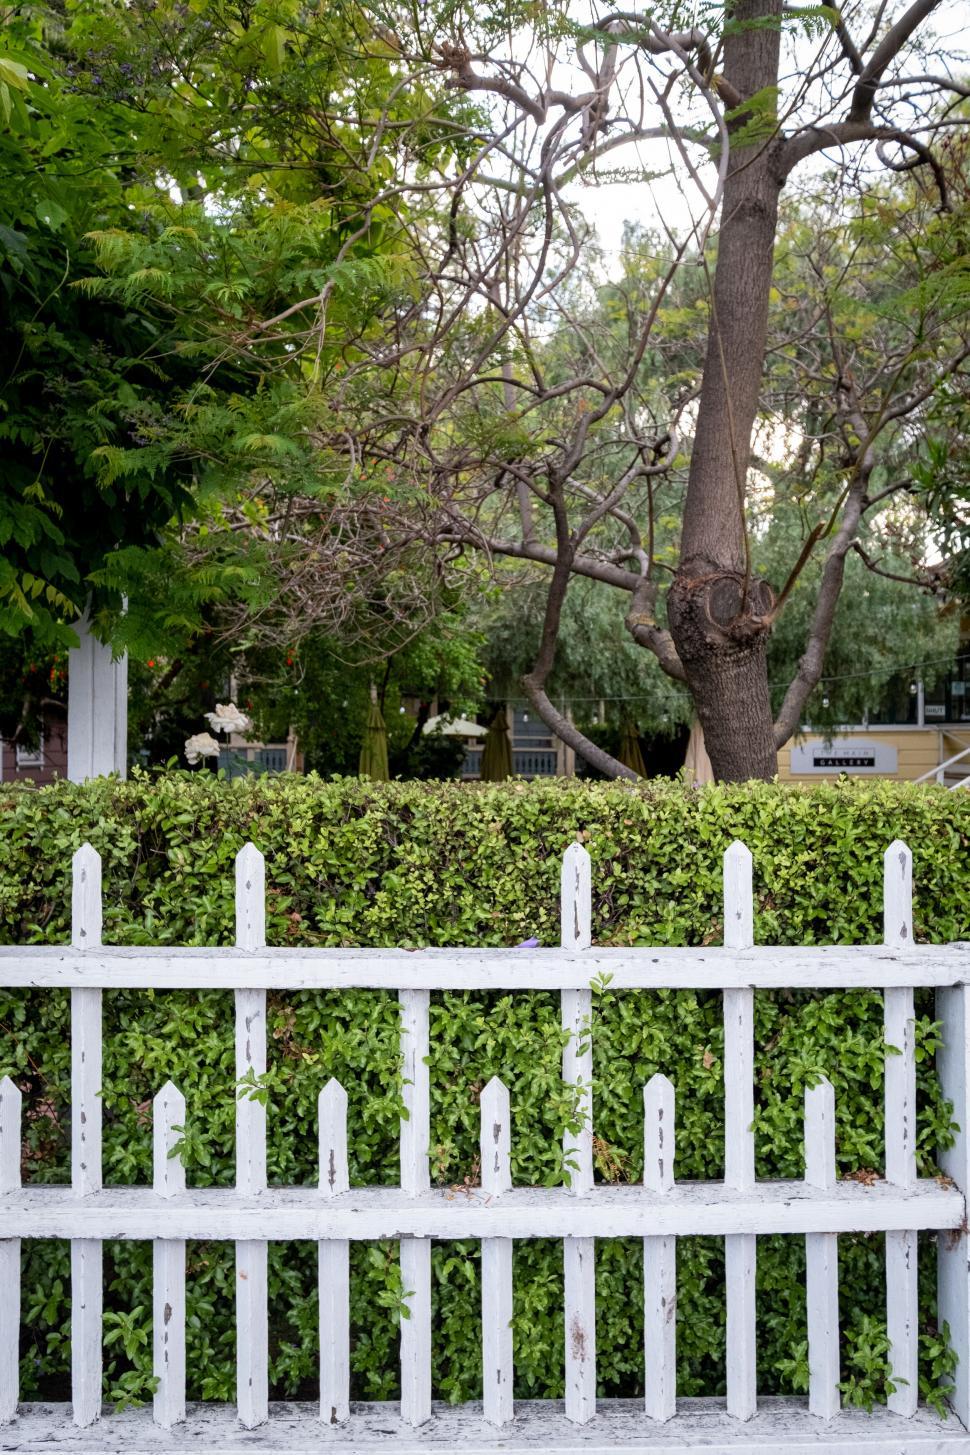 Free Image of White picket fence with lush greenery and tree 